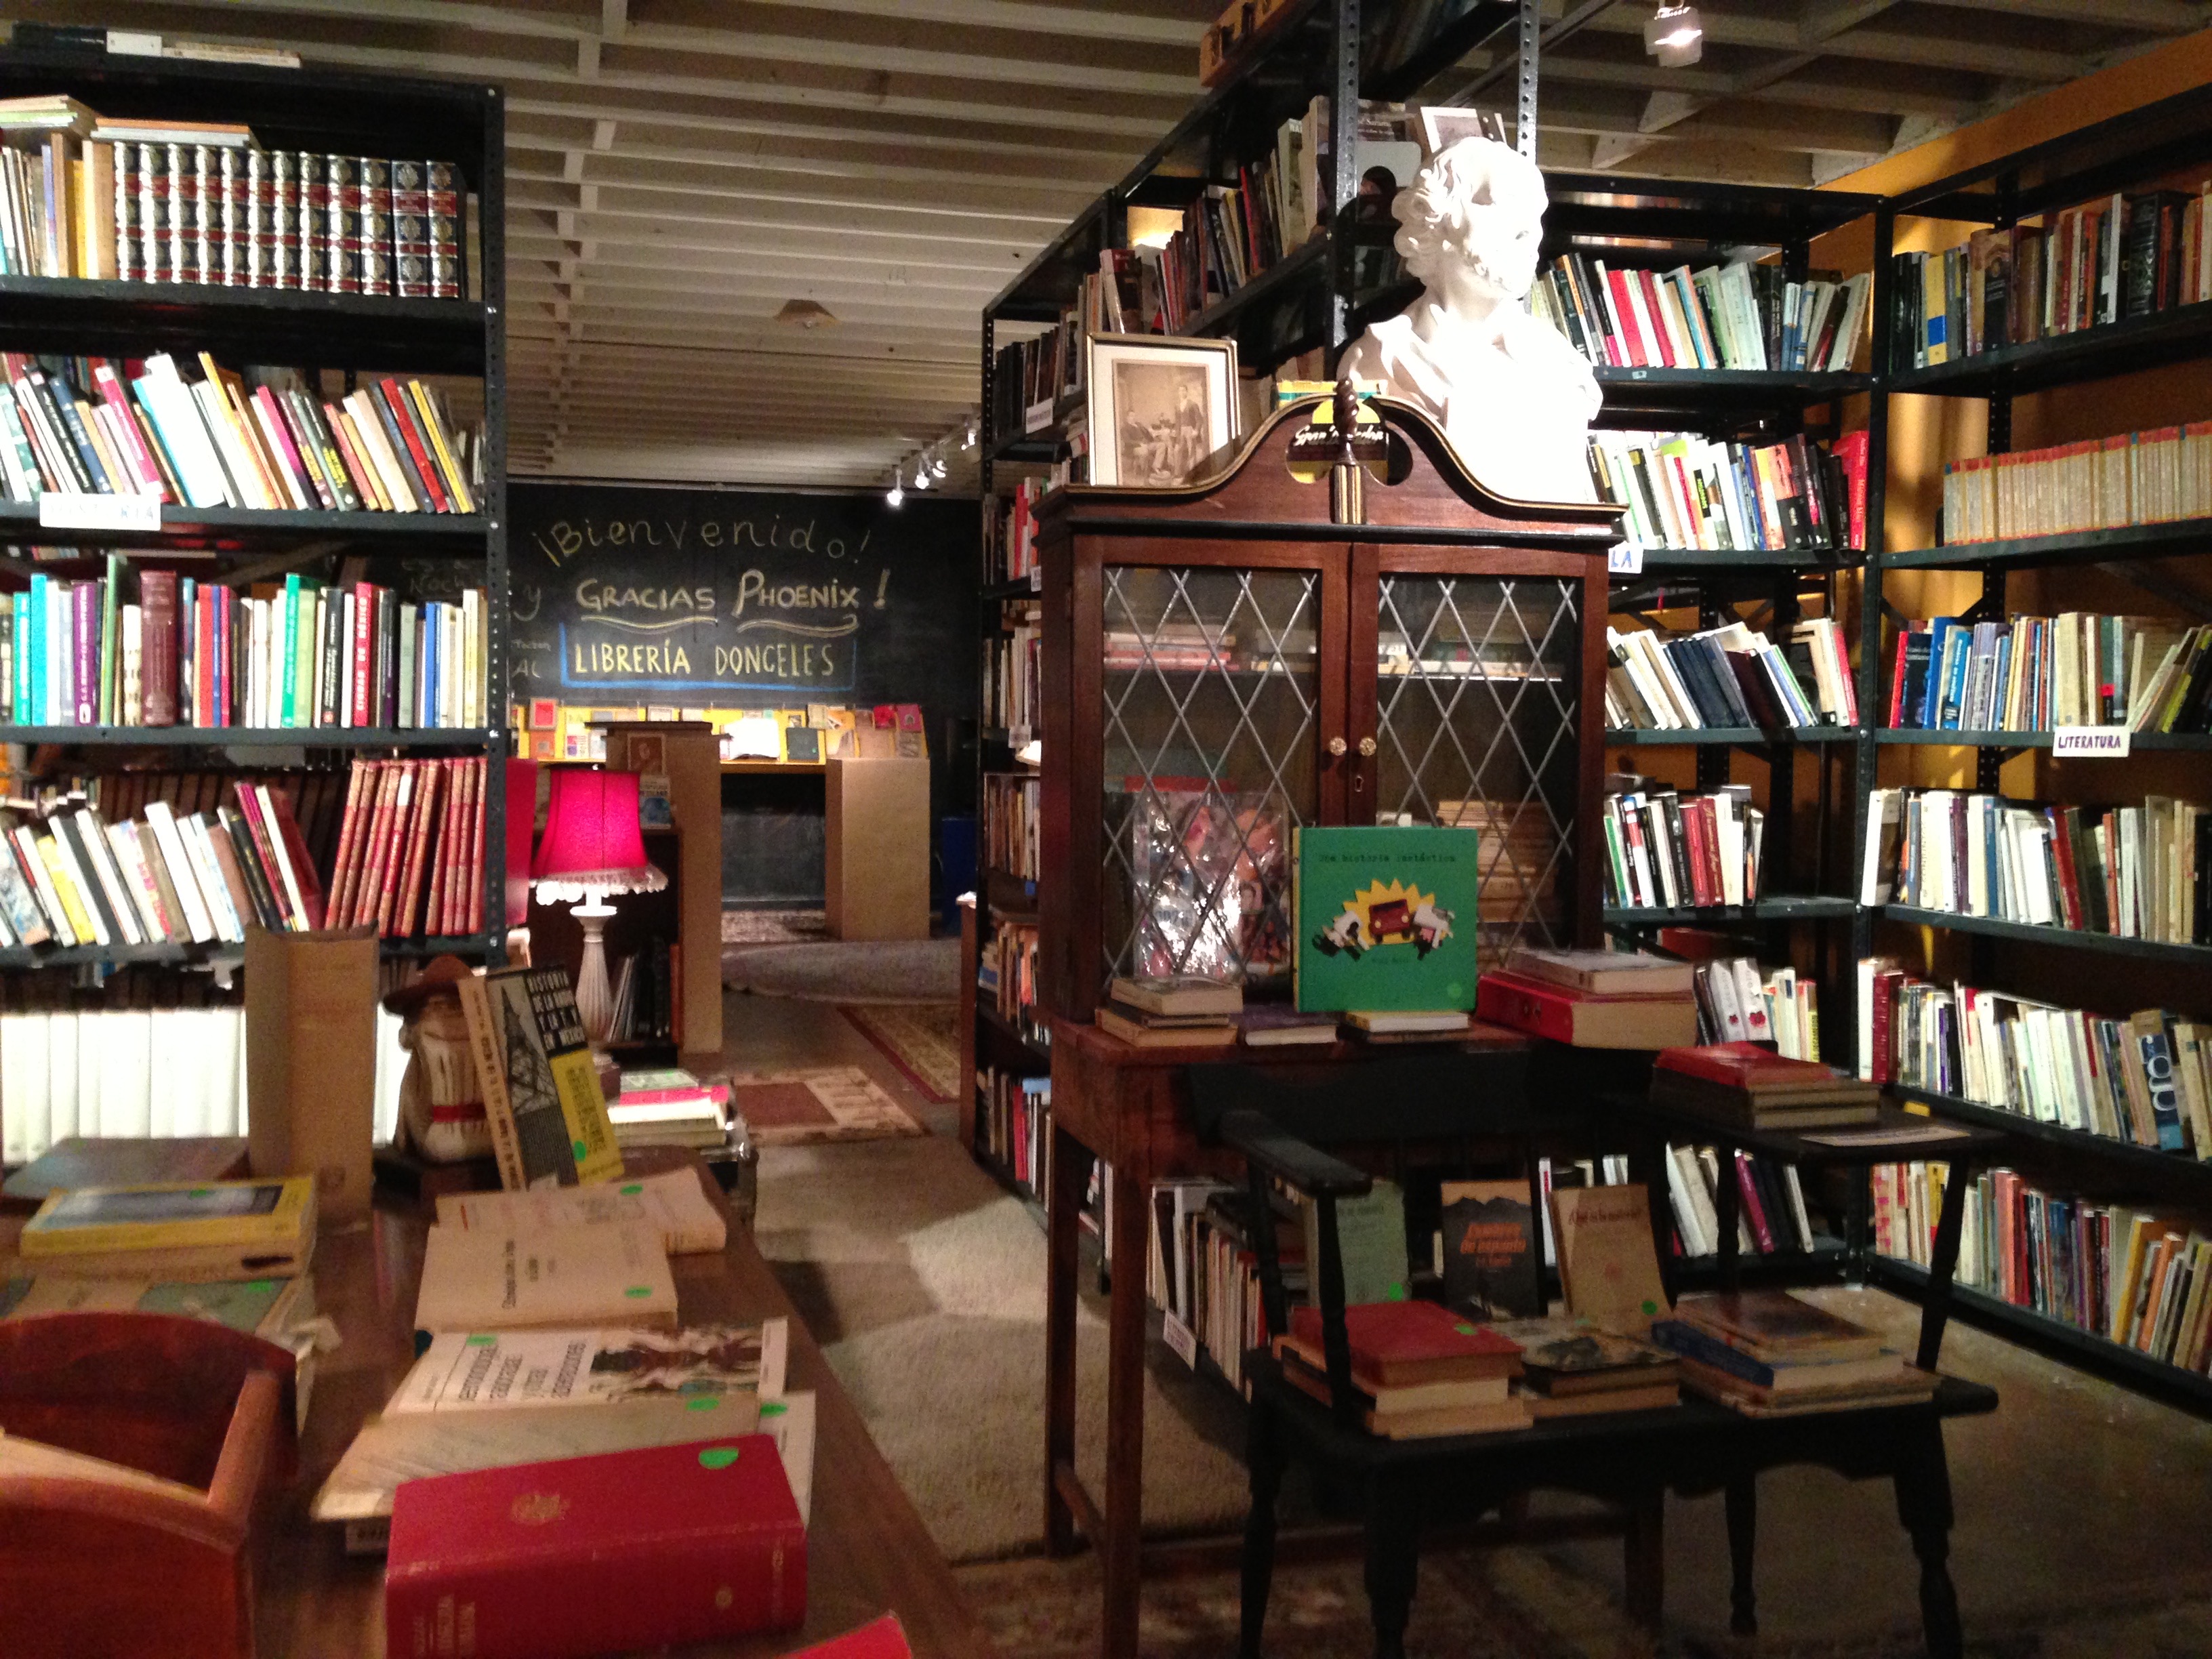 A room filled with bookshelves and bookcases leading to a second room displaying a chalkboard displaying “Bienvenido! Gracias Pheonix! Libreria Donceles”.